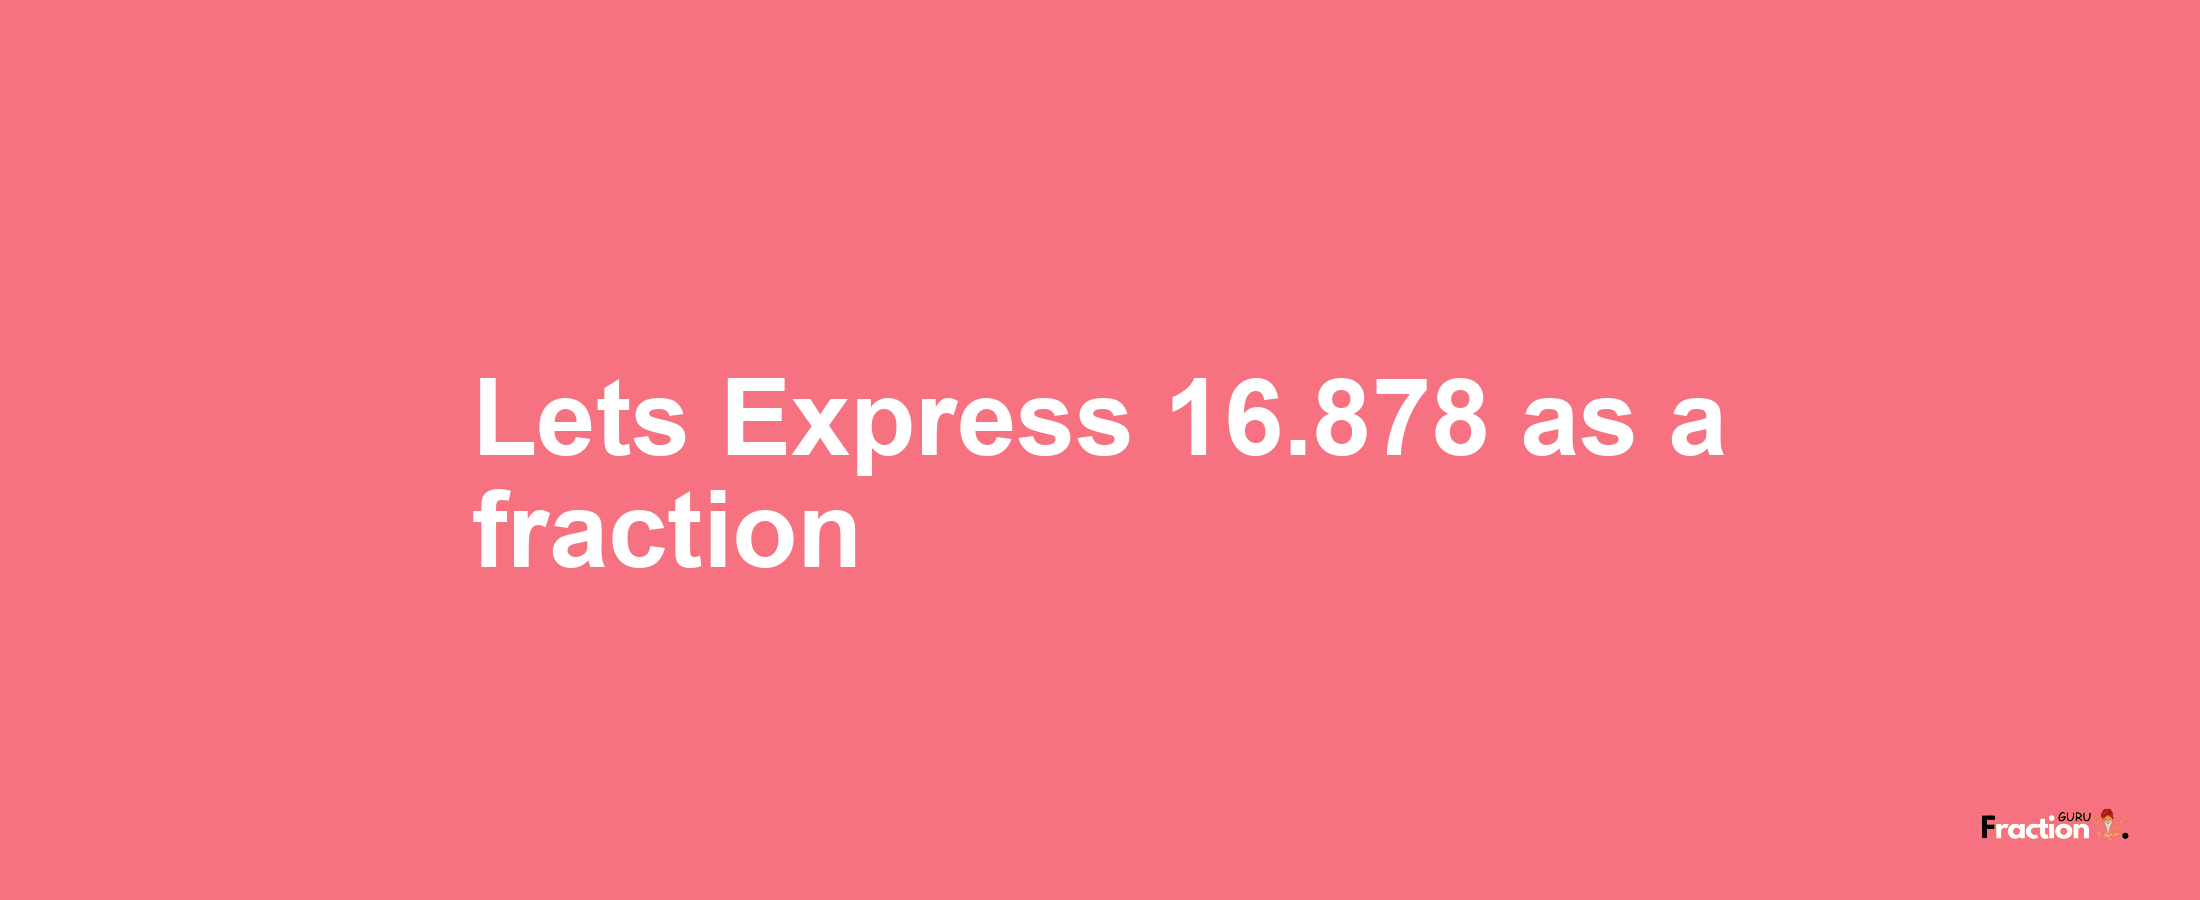 Lets Express 16.878 as afraction